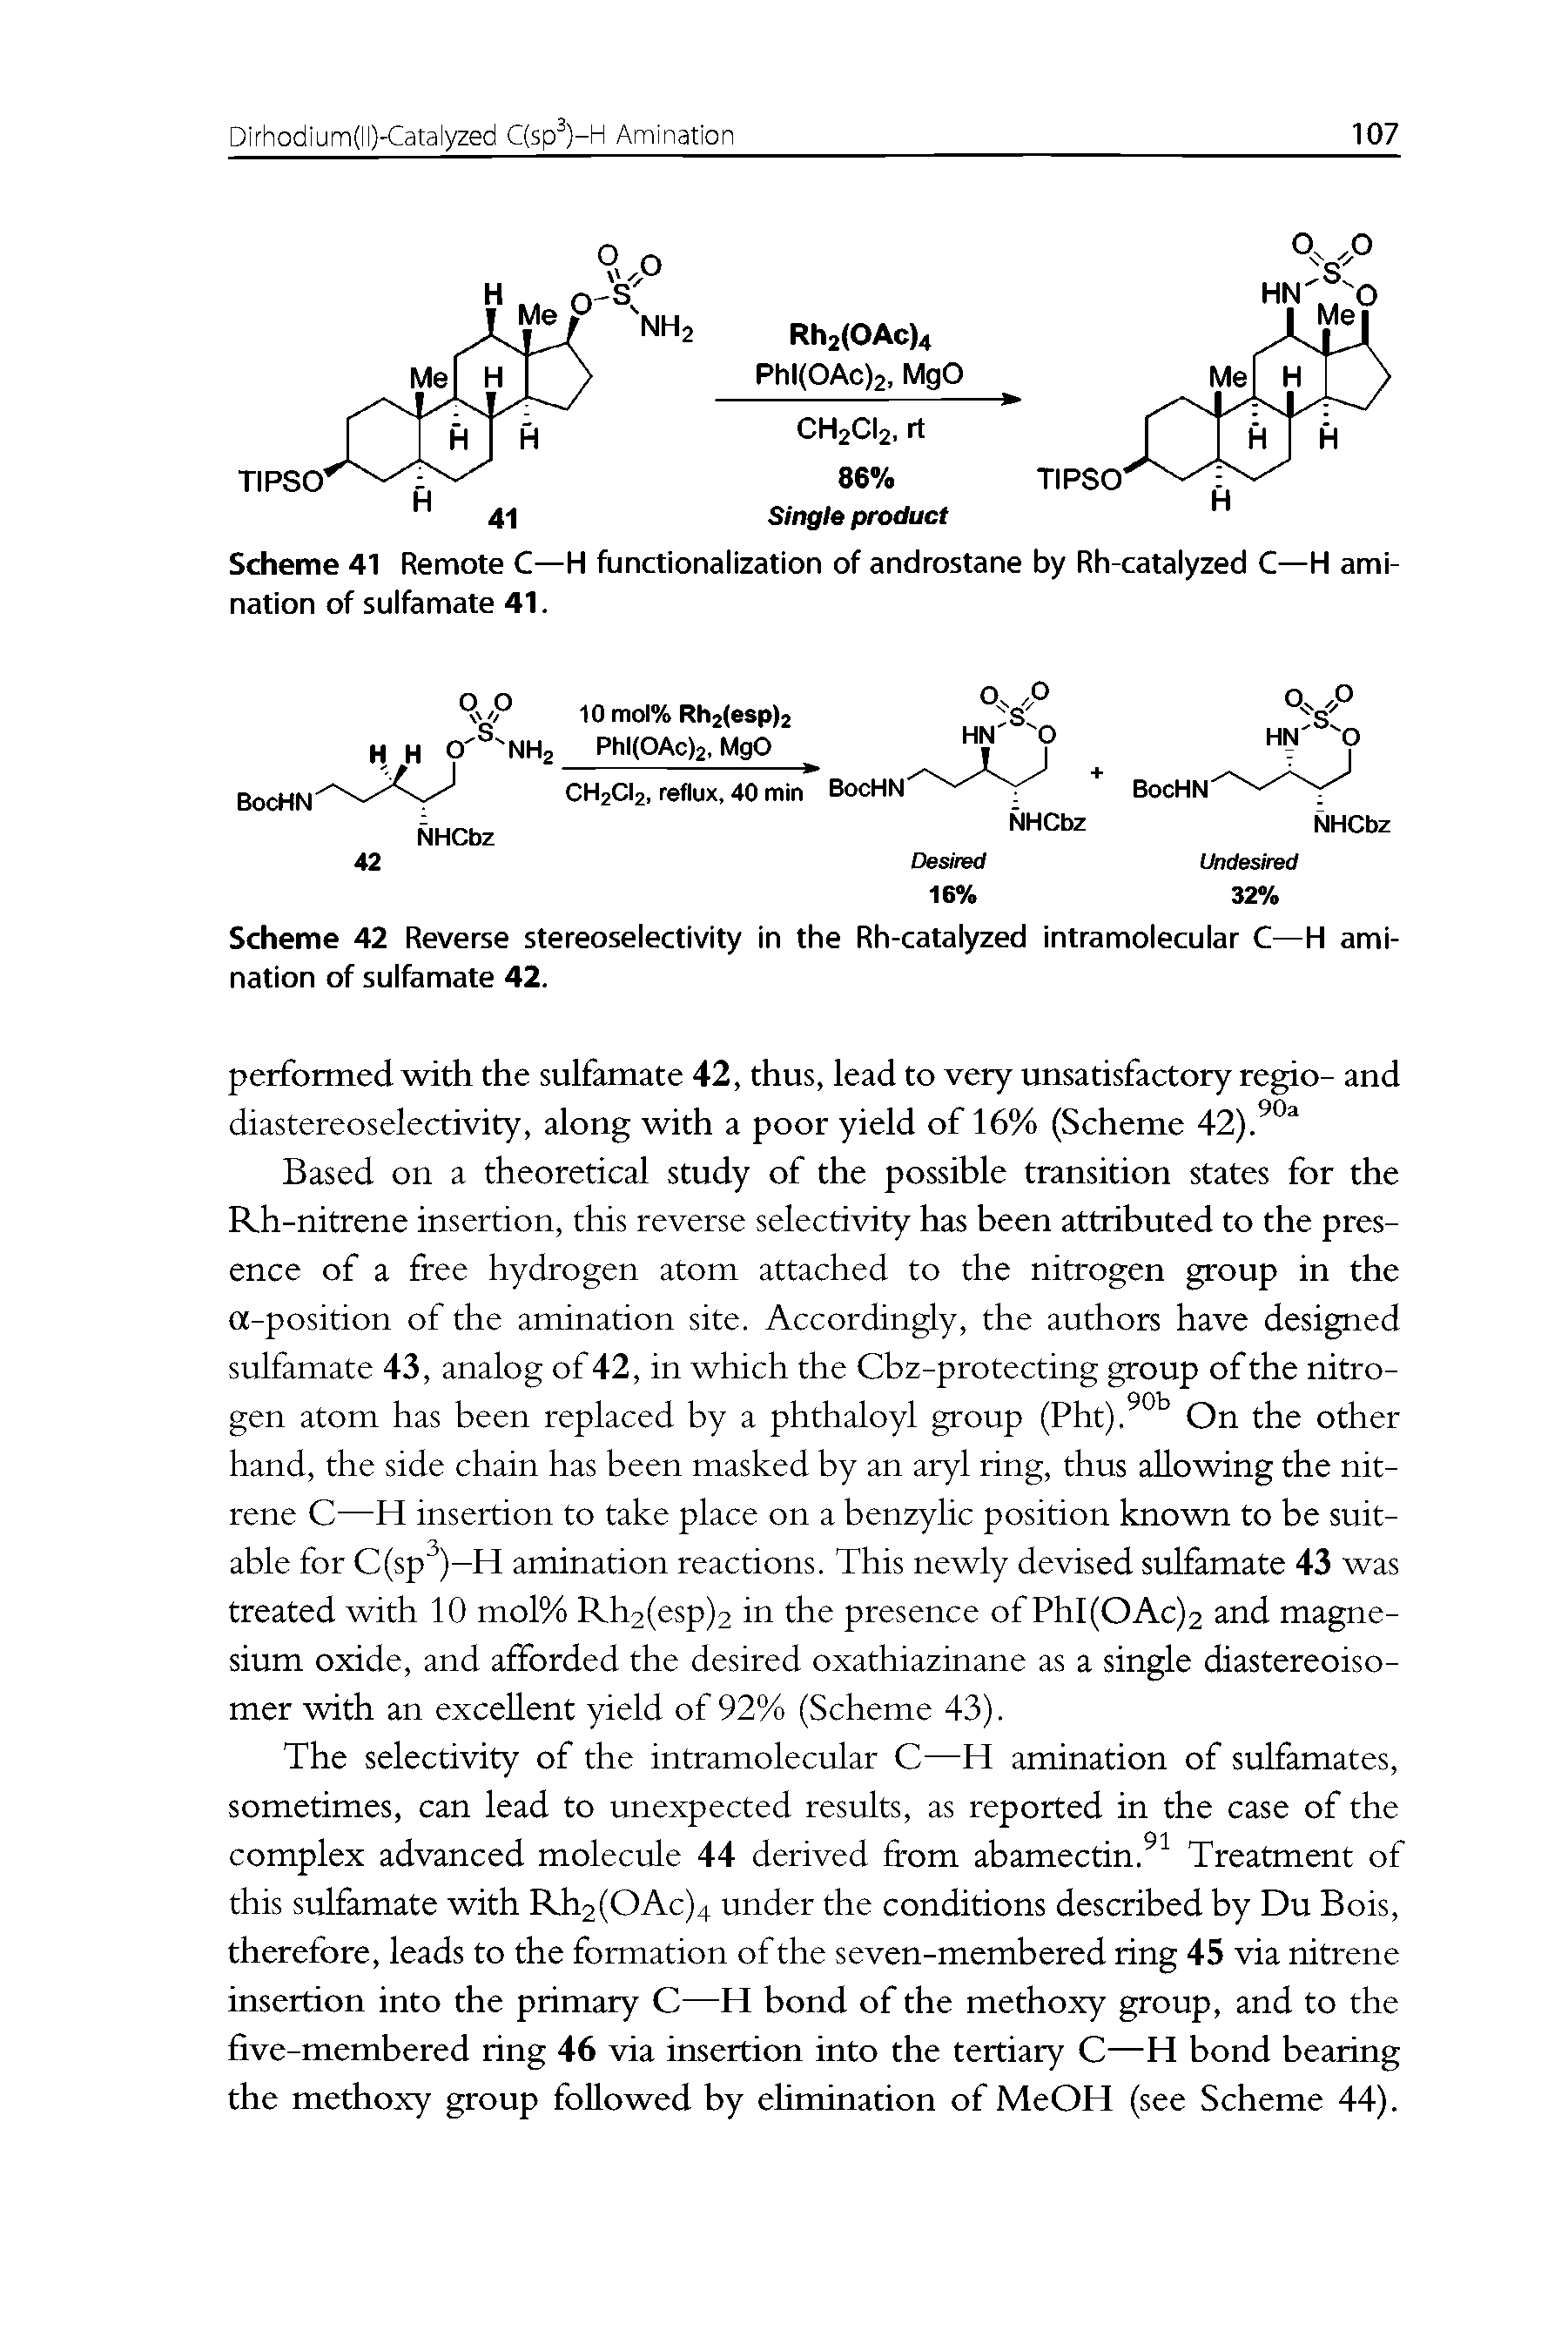 Scheme 42 Reverse stereoselectivity in the Rh-catalyzed intramolecular C—H ami-nation of sulfamate 42.